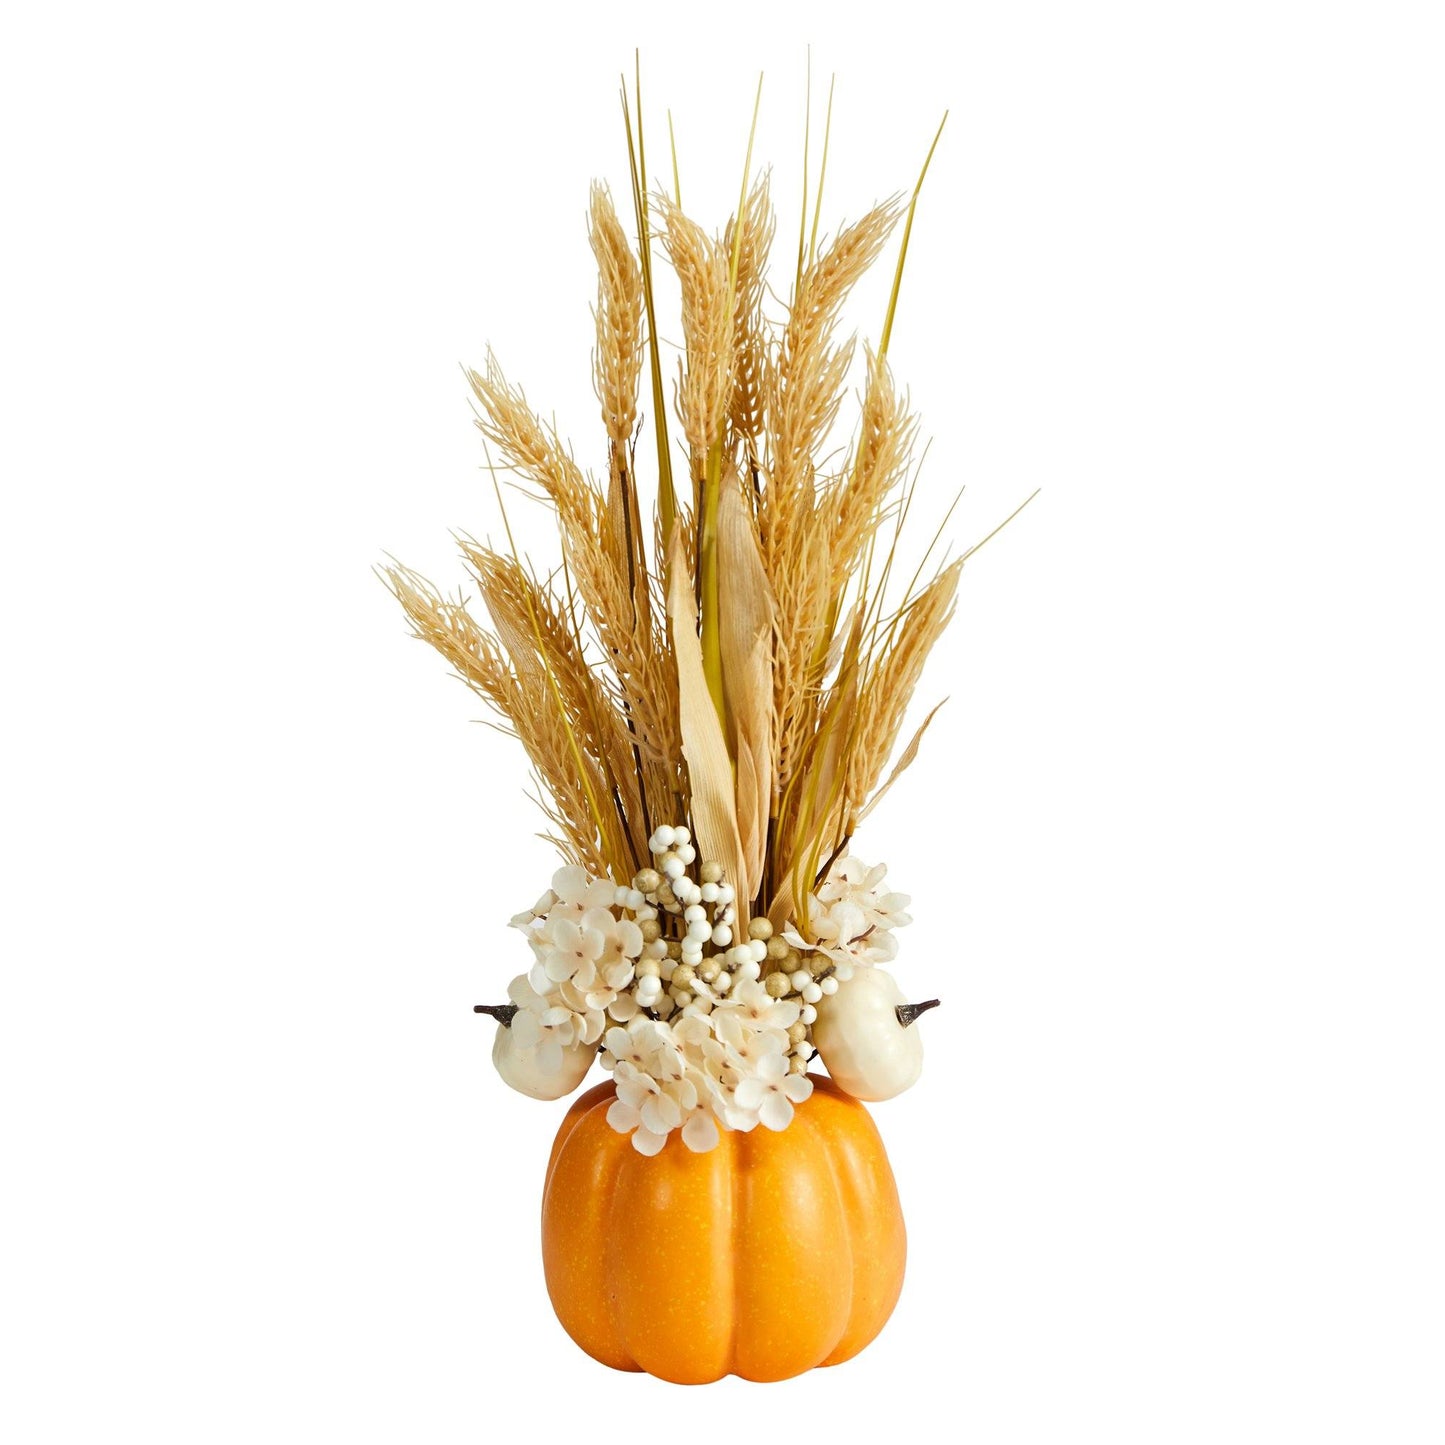 21” Autumn Dried Wheat and Pumpkin Artificial Fall Arrangement in Decorative Pumpkin Vase by Nearly Natural